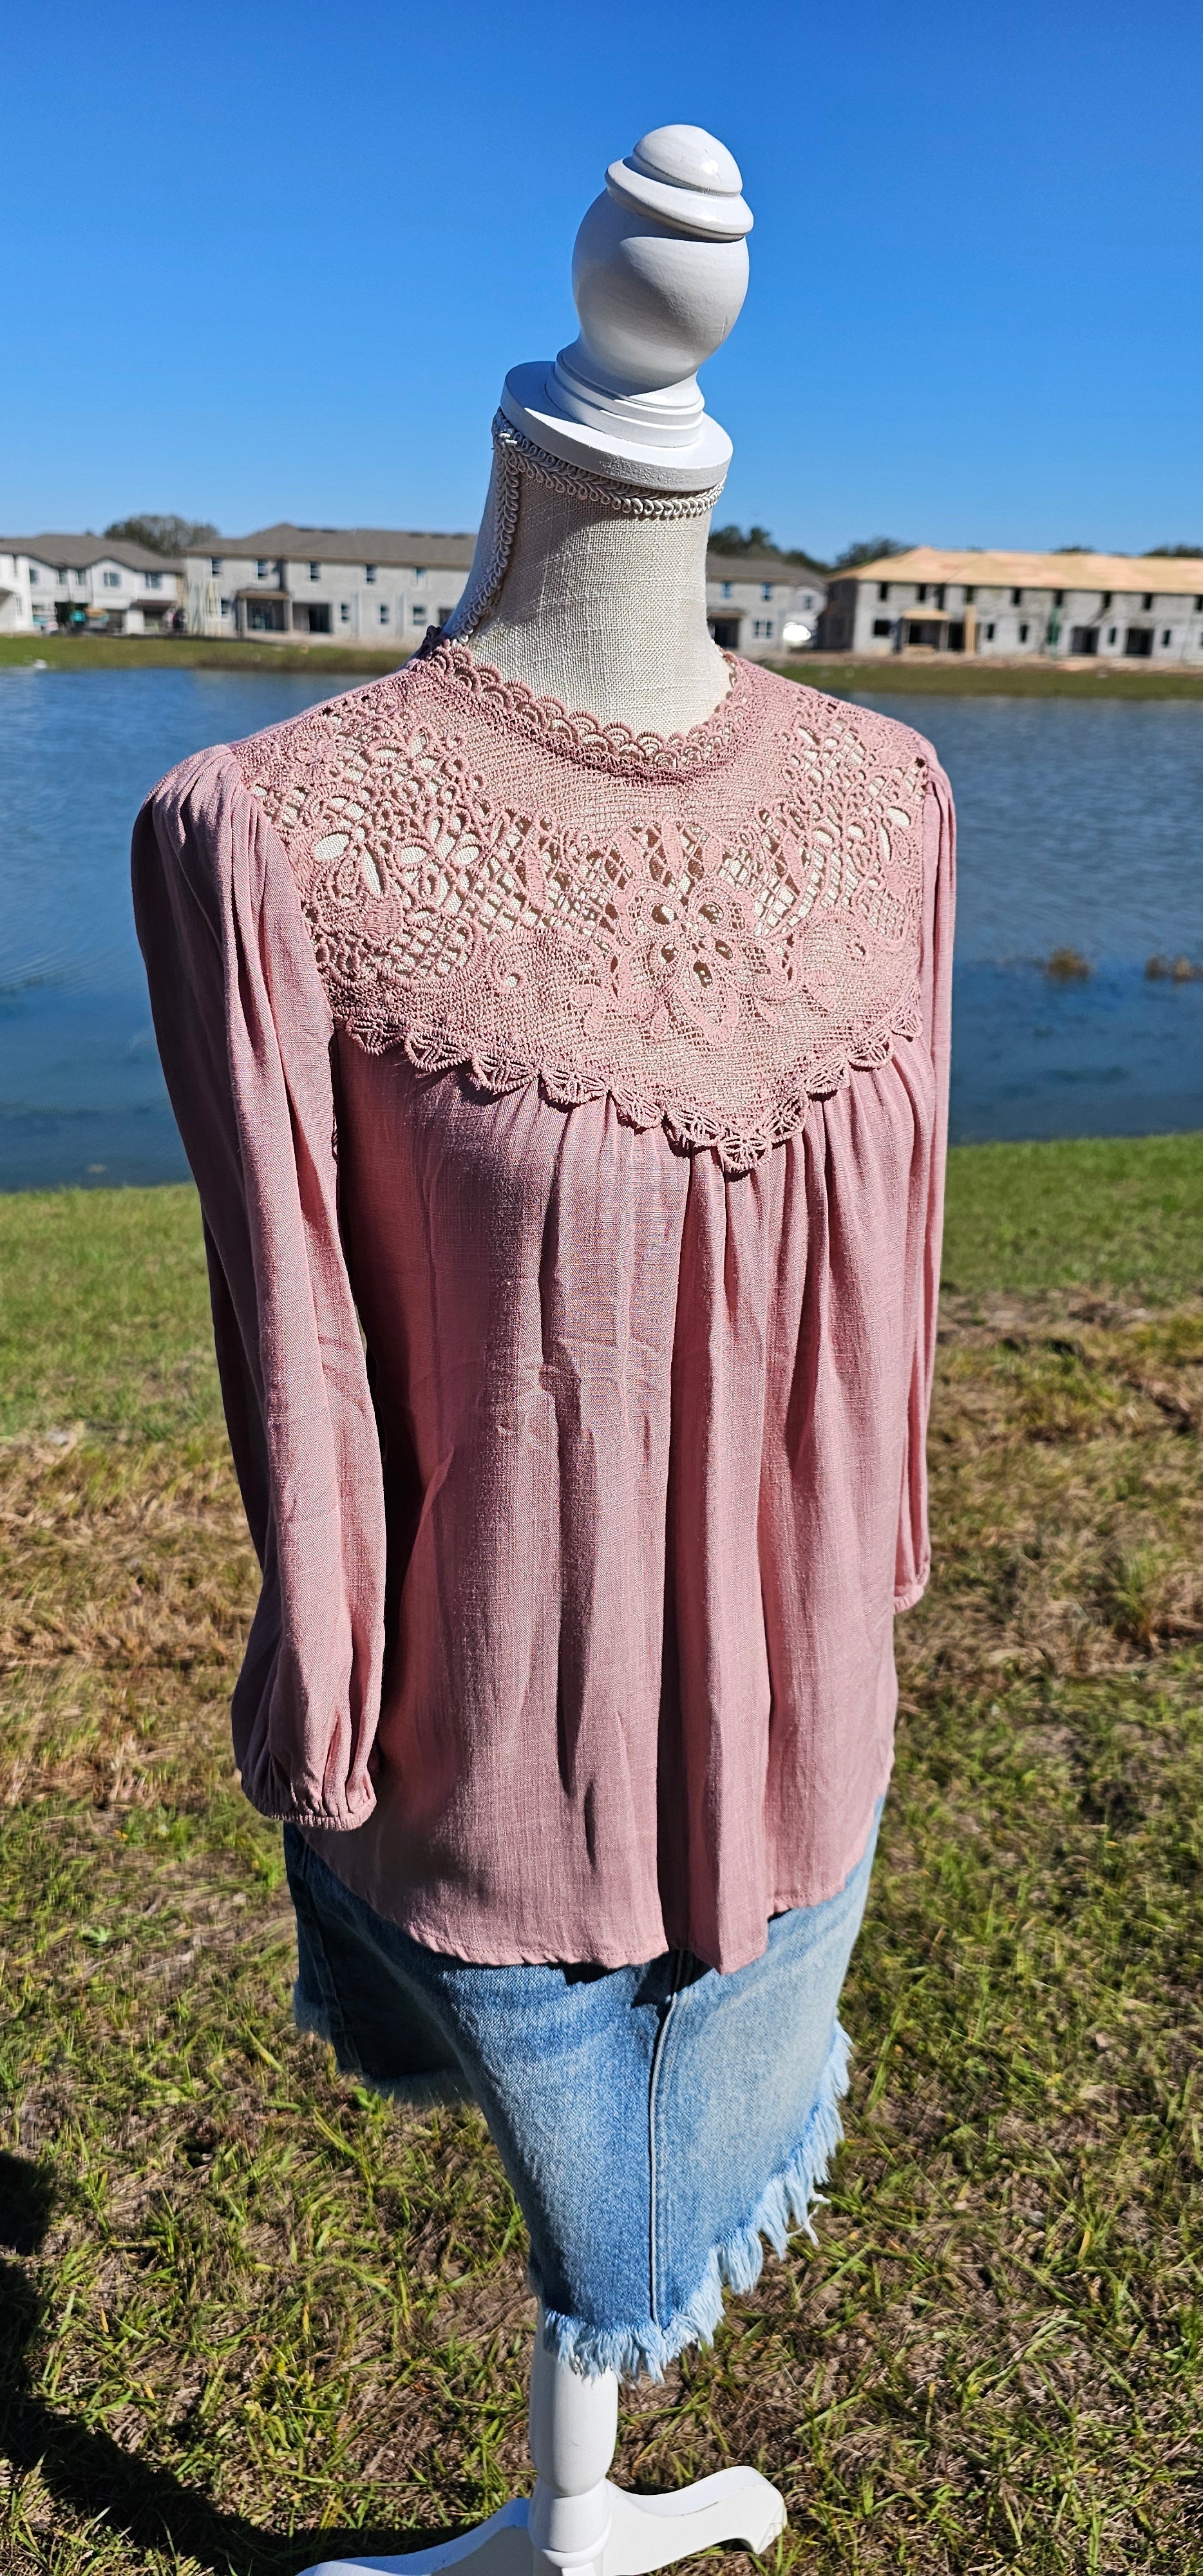 Rock your look with this ravishing top that'll take your fashion to the next level! With its elegant lace mock neck, stylish back-button closure with keyhole, and oh-so-pretty front lace inset and pleated bubble sleeves, you'll be sure to draw admiring glances wherever you go. Let's get fabulous! Sizes small through large.